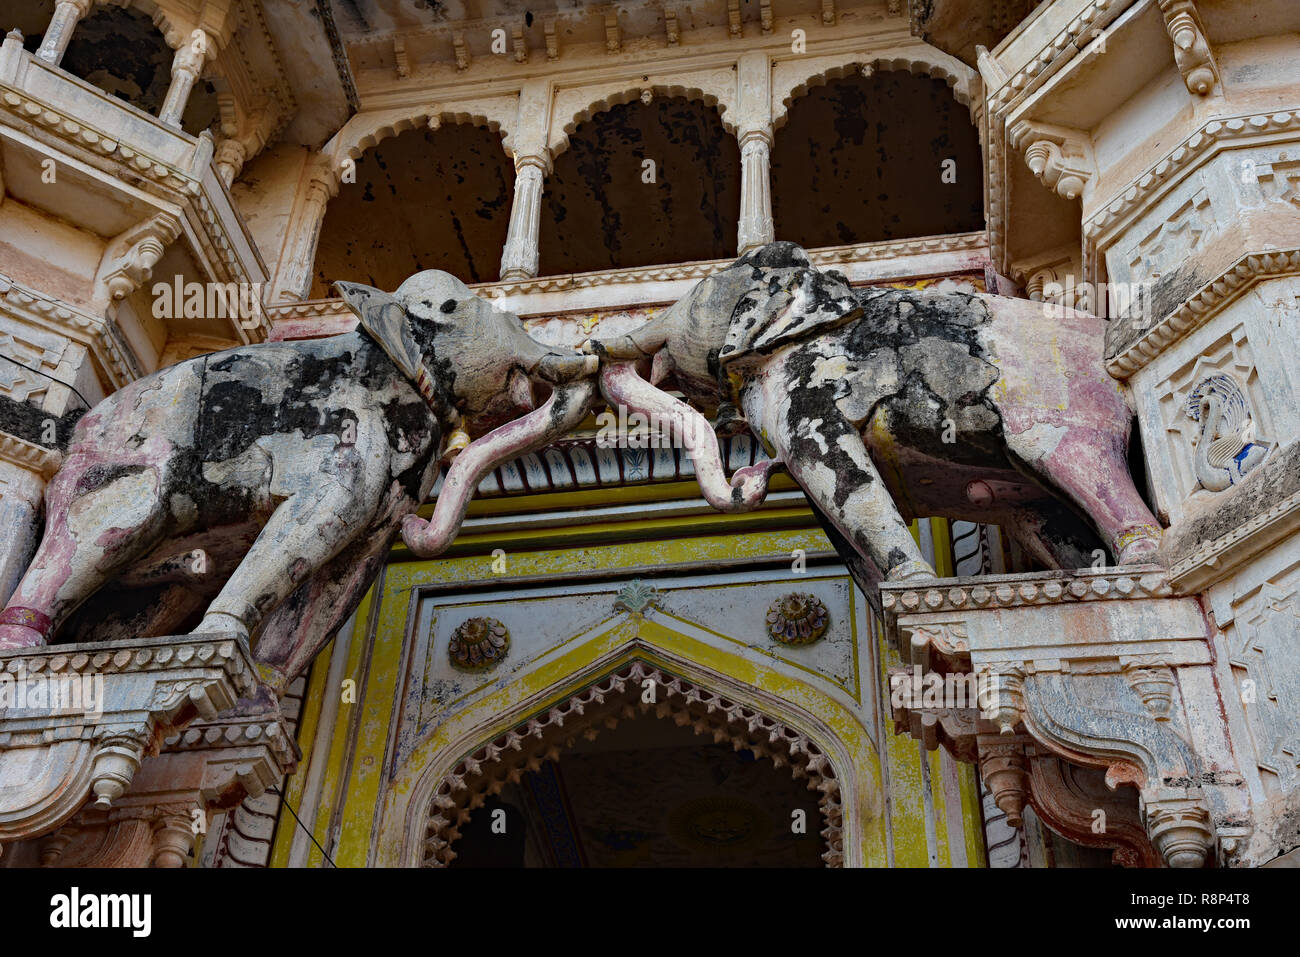 Stone elephants stand over the entrance to Garh Palace. Hathi Pol (Elephant Gate) is adorned with intricately carved details, Bundi, Rajasthan, India. Stock Photo